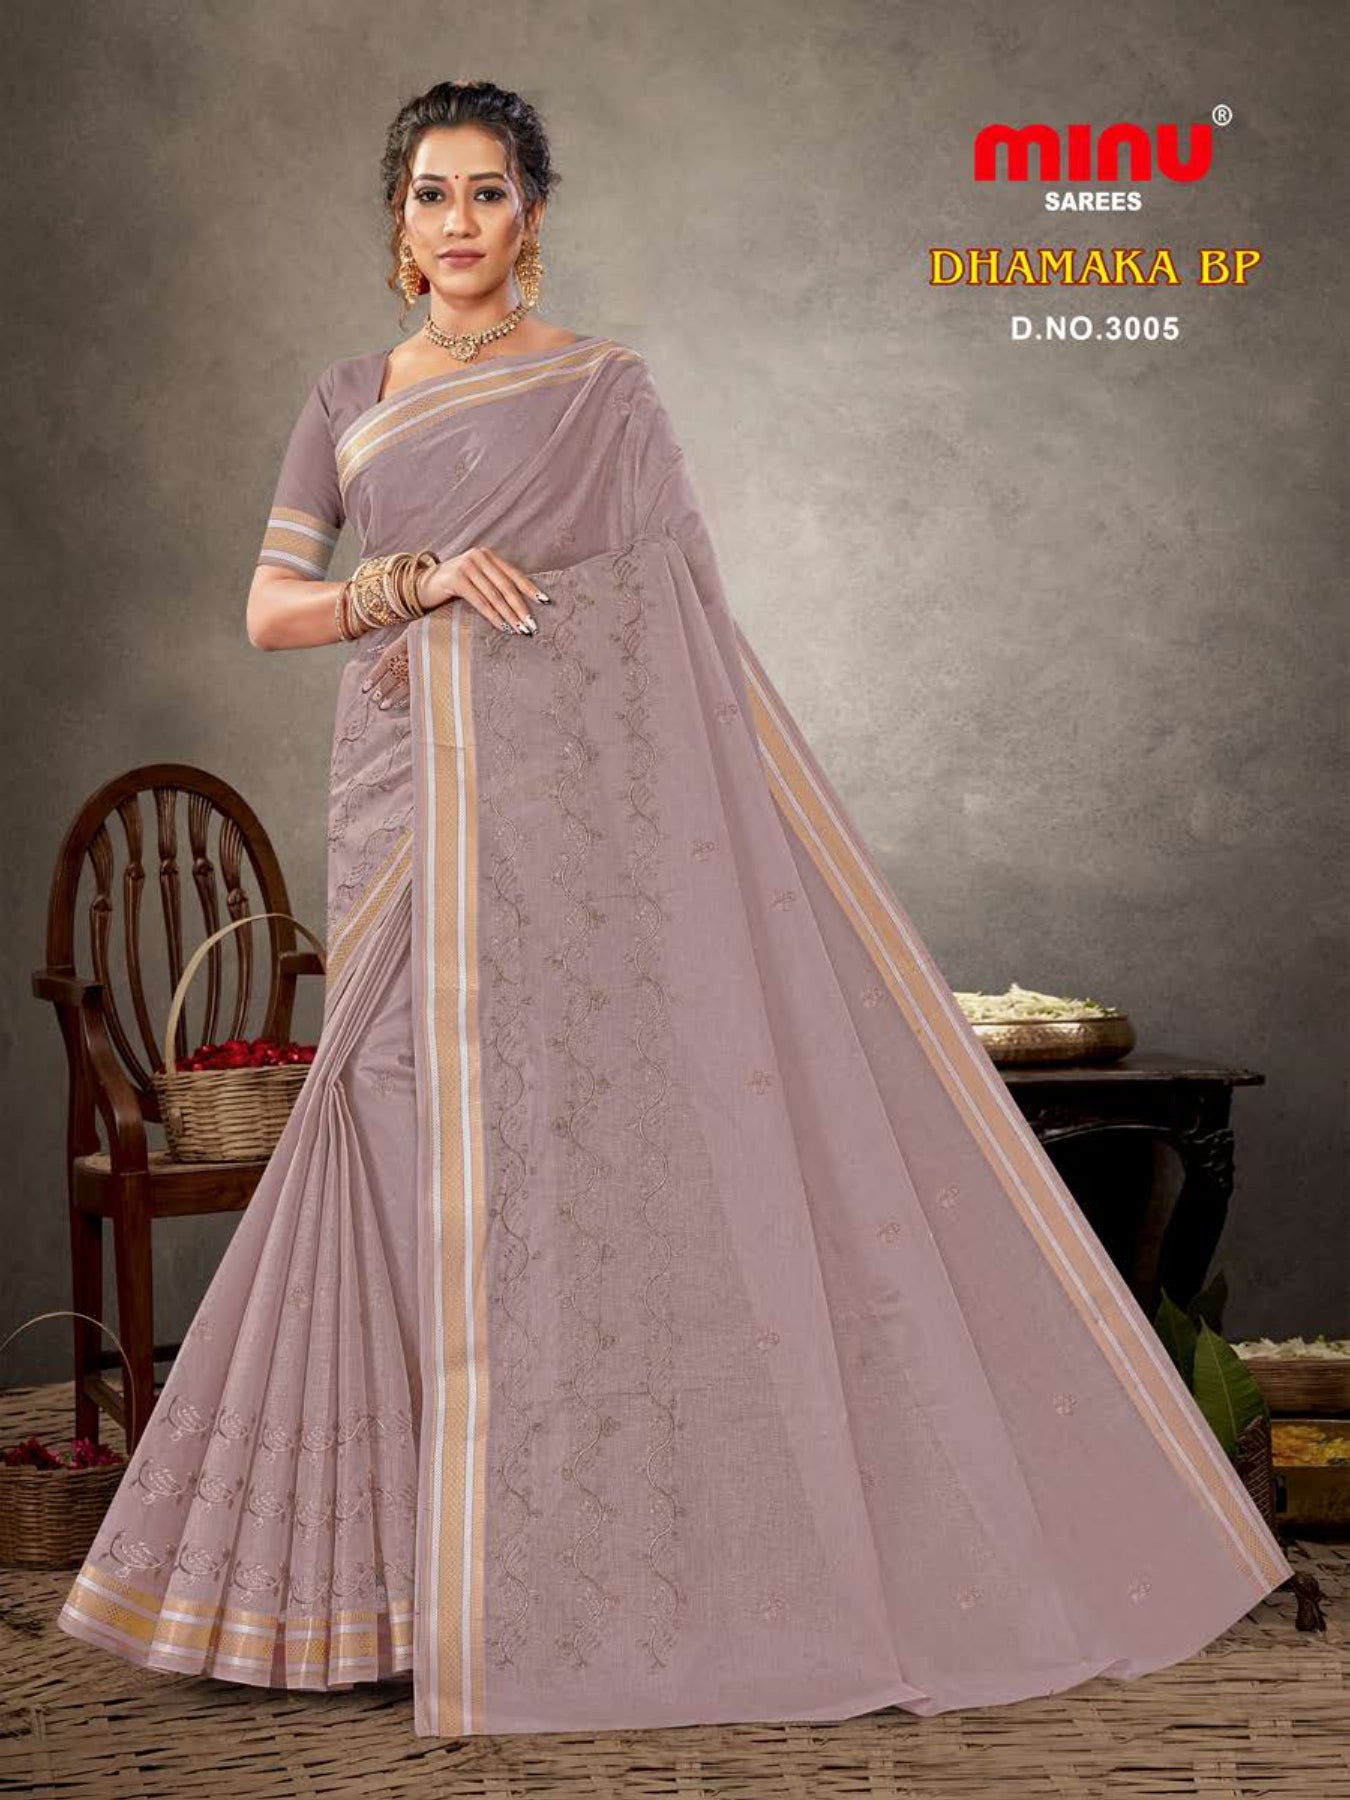 online image of embroidered saree wearing woman